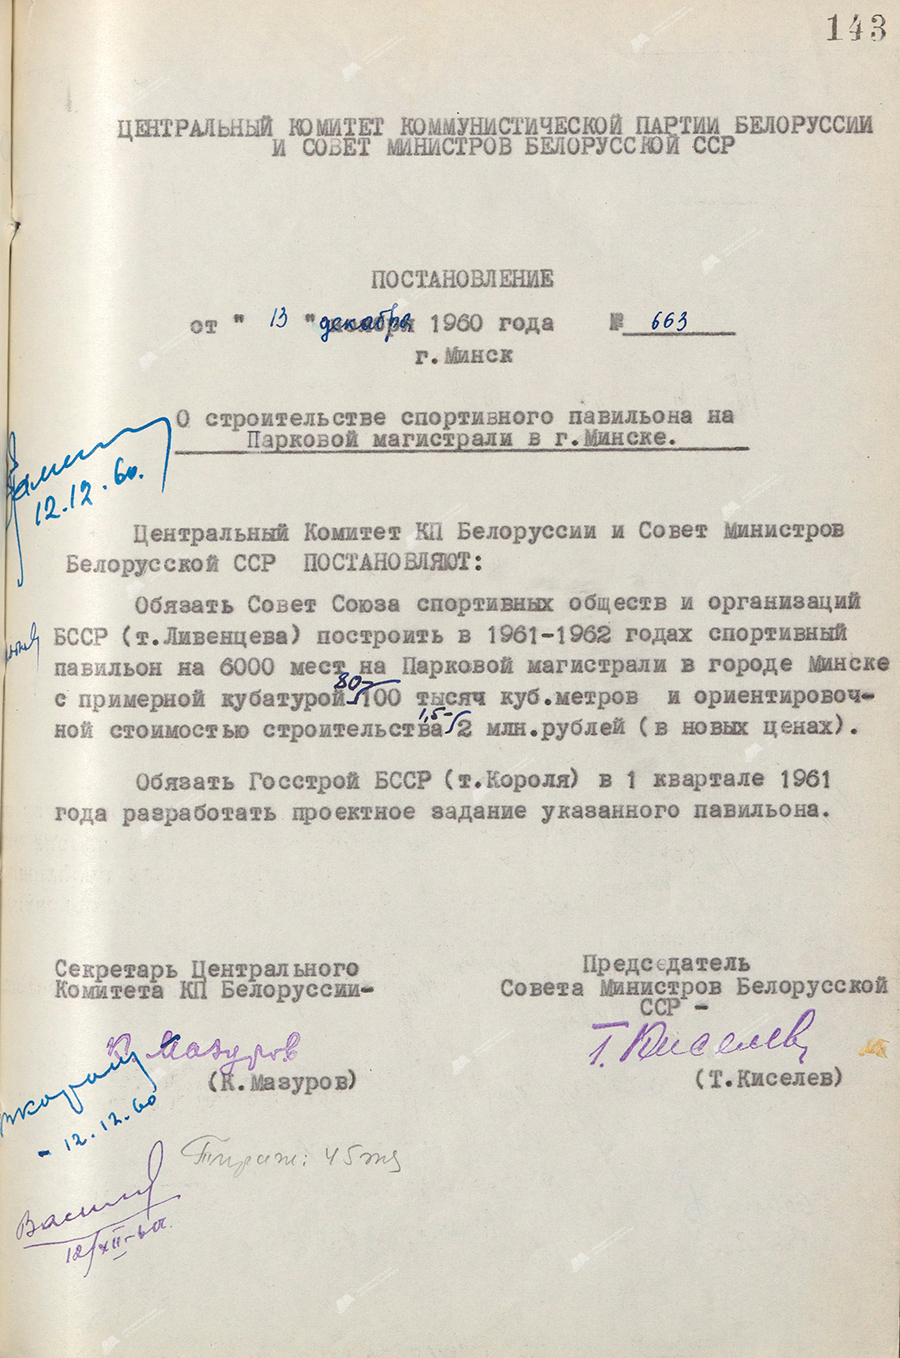 Resolution No. 663 of the Central Committee of the Communist Party of Belarus and the Council of Ministers of the BSSR «On the construction of a sports pavilion on the Park Highway in Minsk»-с. 0